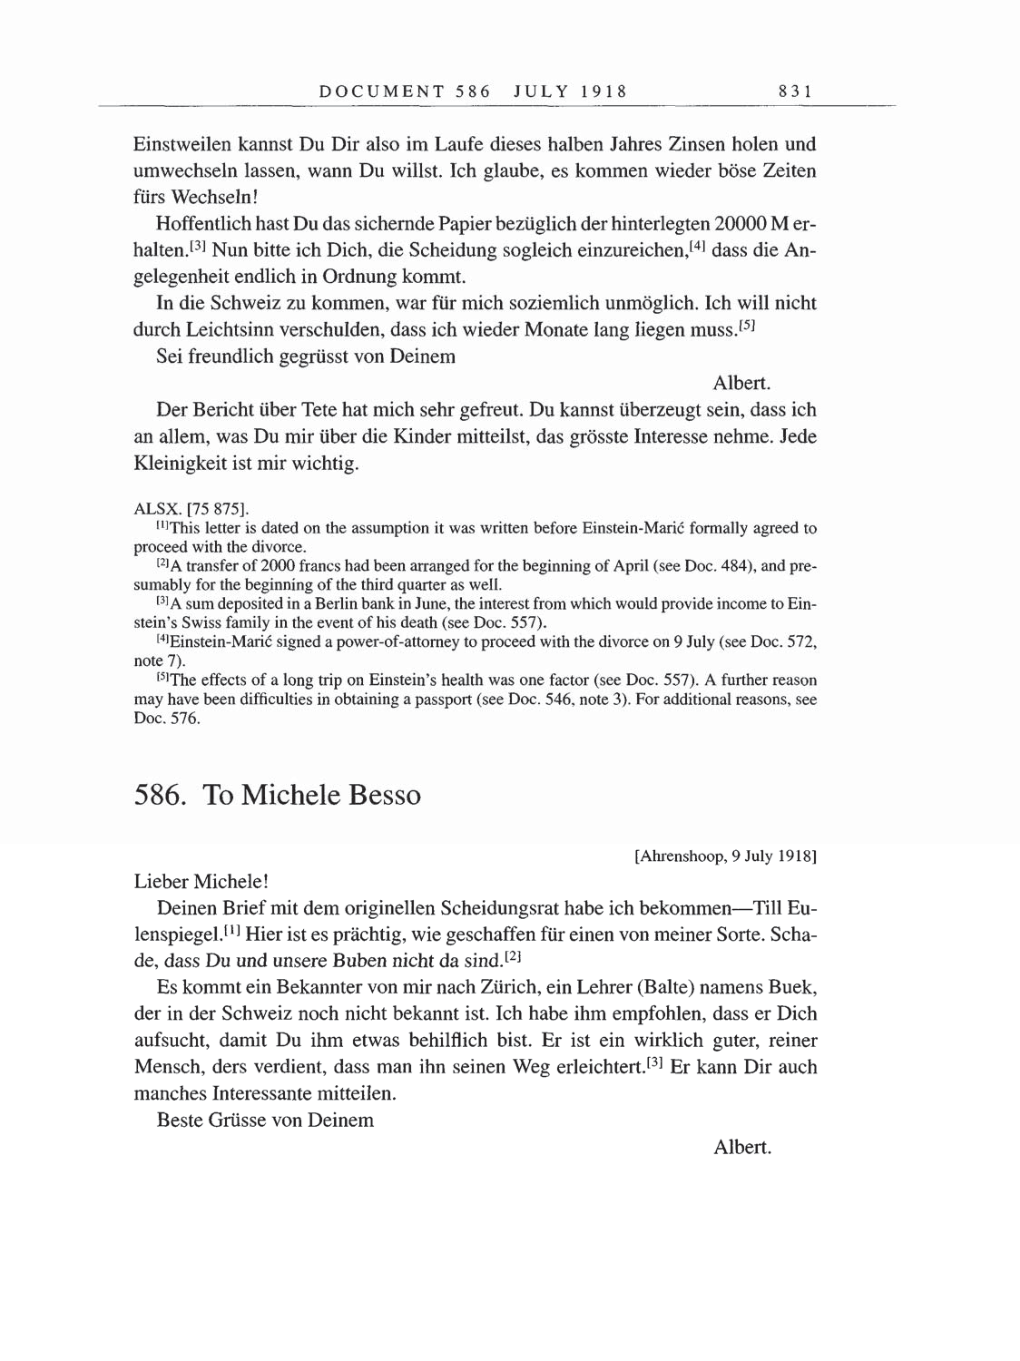 Volume 8, Part B: The Berlin Years: Correspondence 1918 page 831